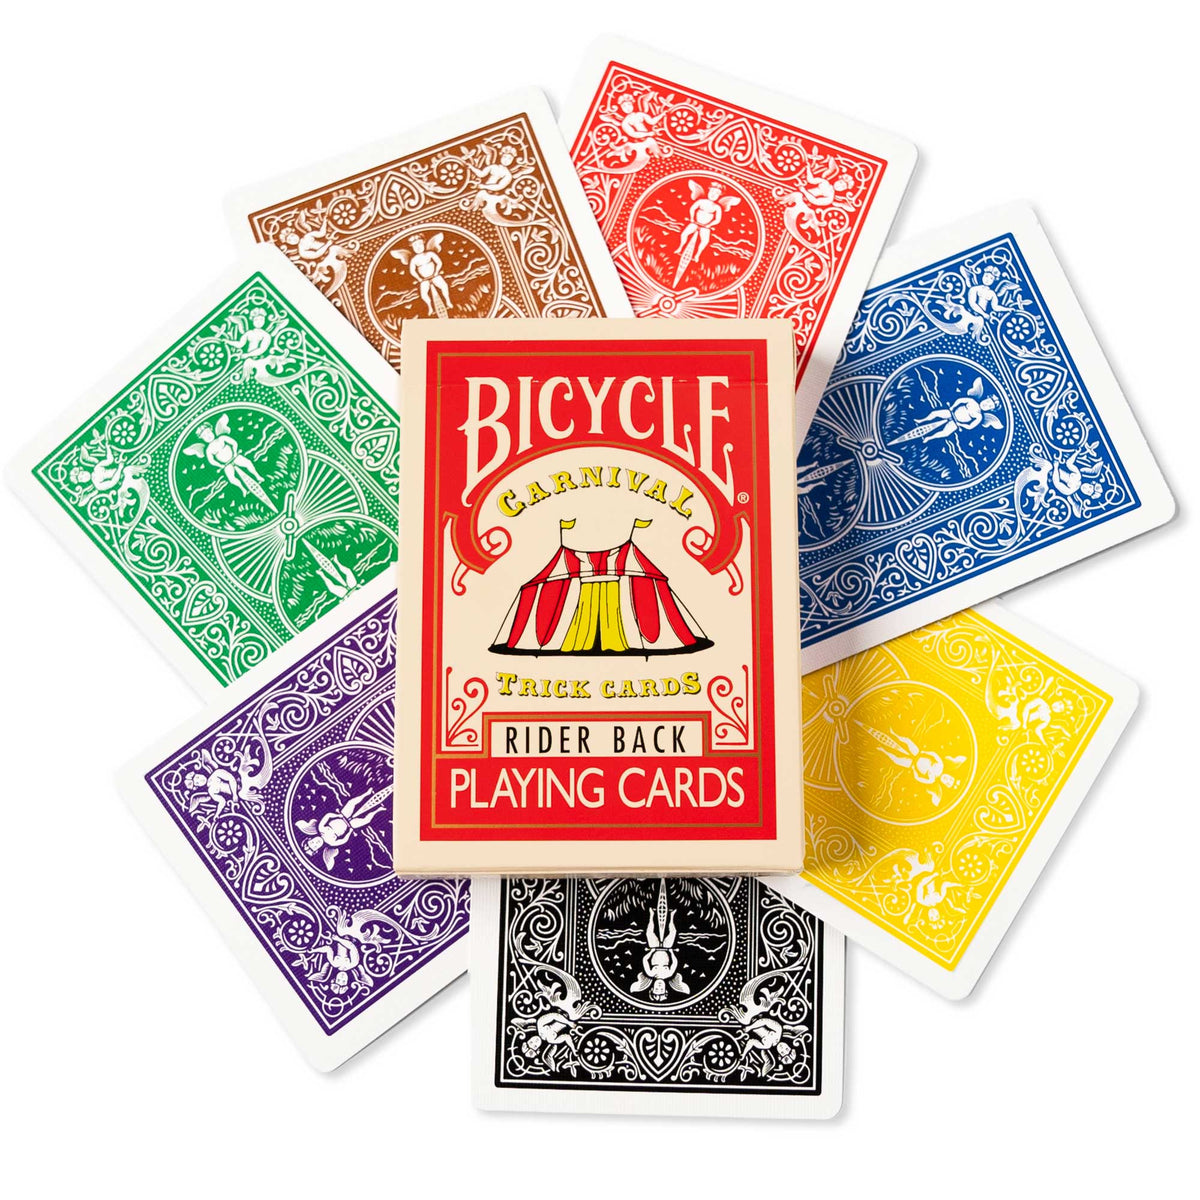 Magic Gaff Deck - Limited Bicycle Edition